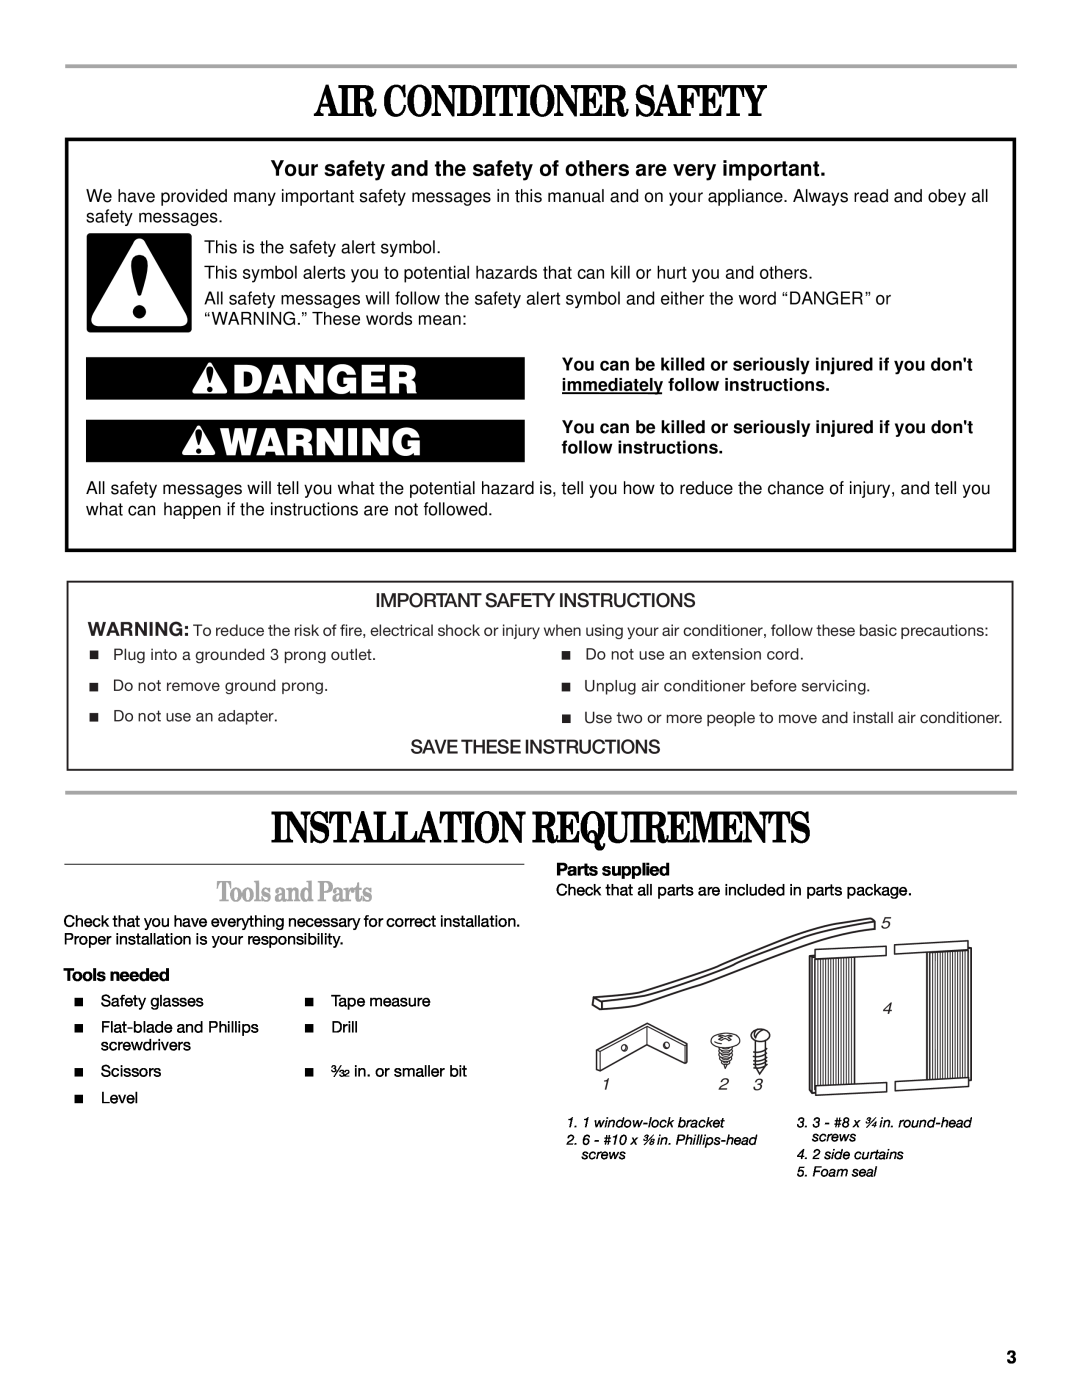 Whirlpool ACQ062MP0 Air Conditioner Safety, Installation Requirements, Tools and Parts, Important Safety Instructions 